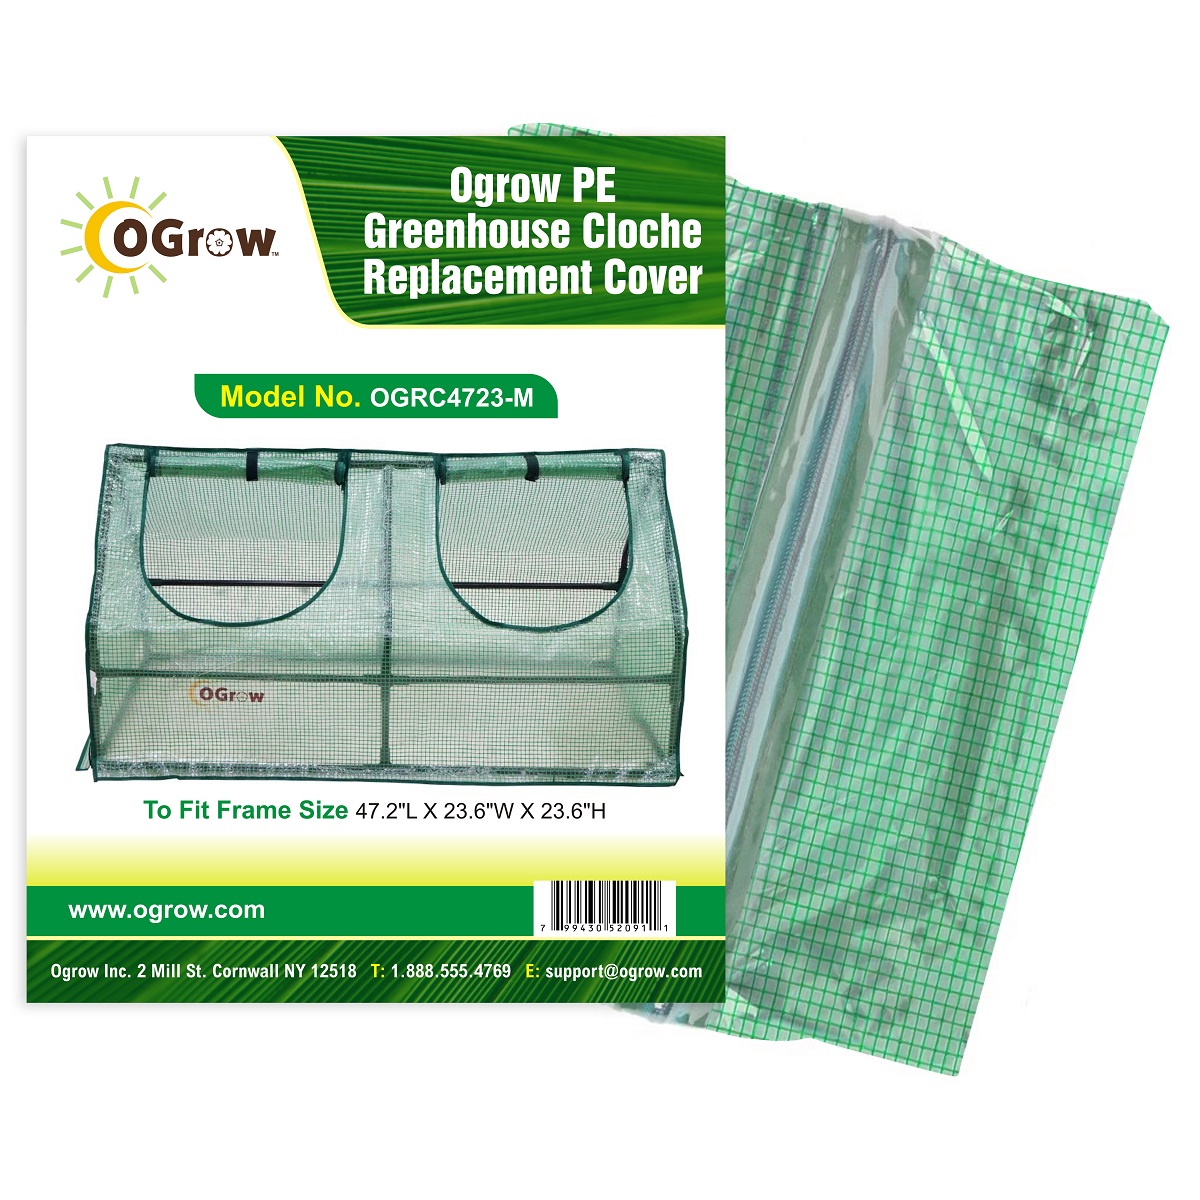 oGrow OGRC4723-M PE Greenhouse Cloche PE Replacement Cover - To Fit Frame Size 47.2"L X 23.6"W X 23.6"H